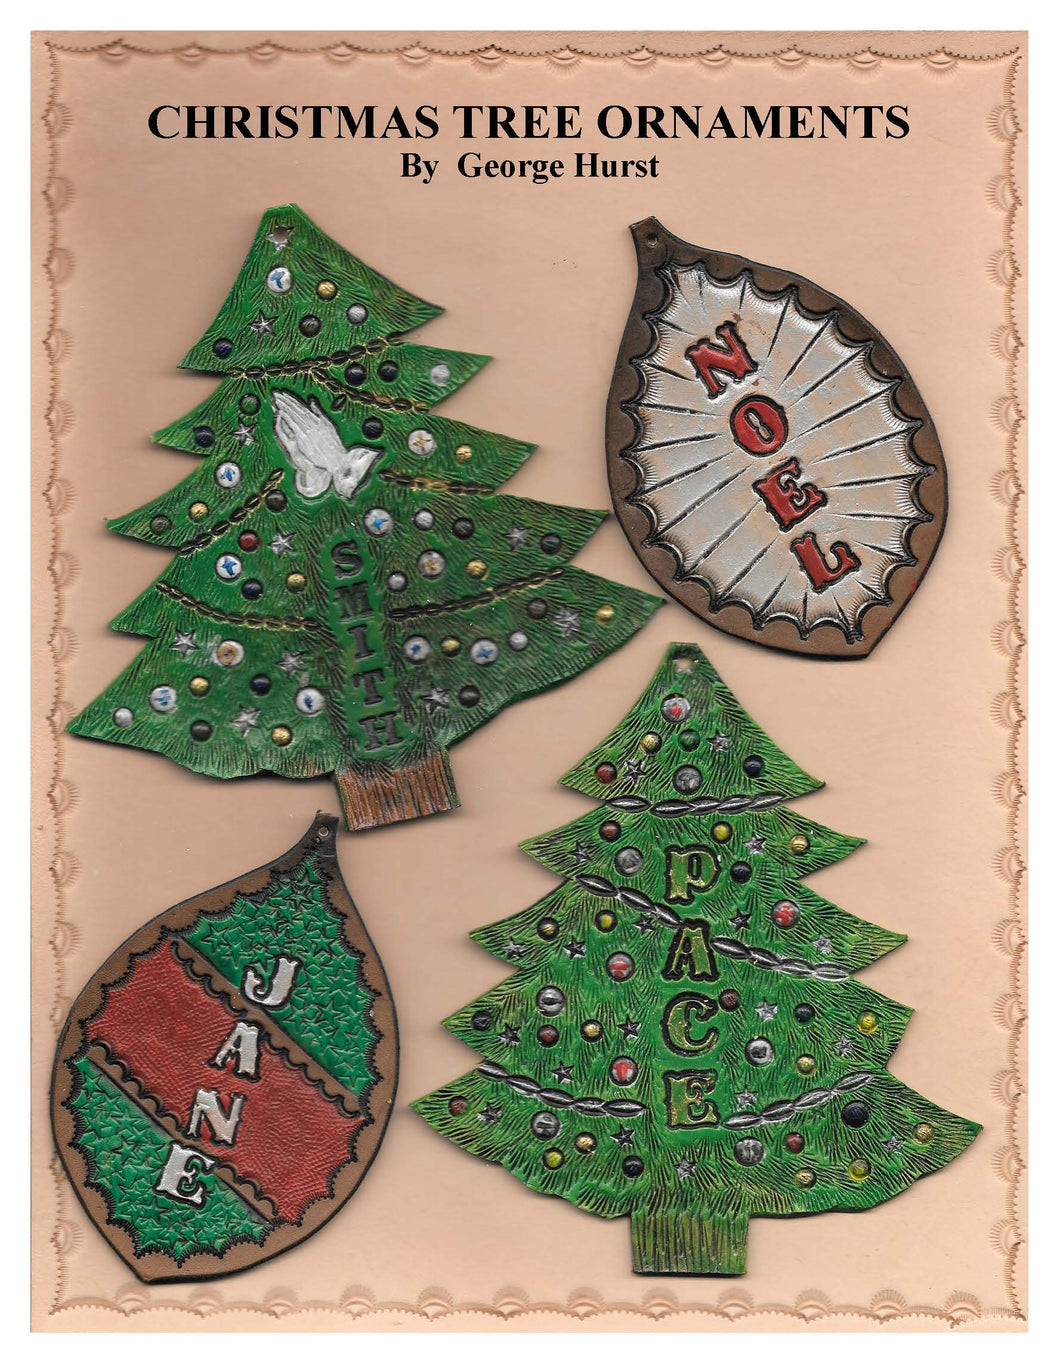 Christmas Tree Ornaments by George Hurst